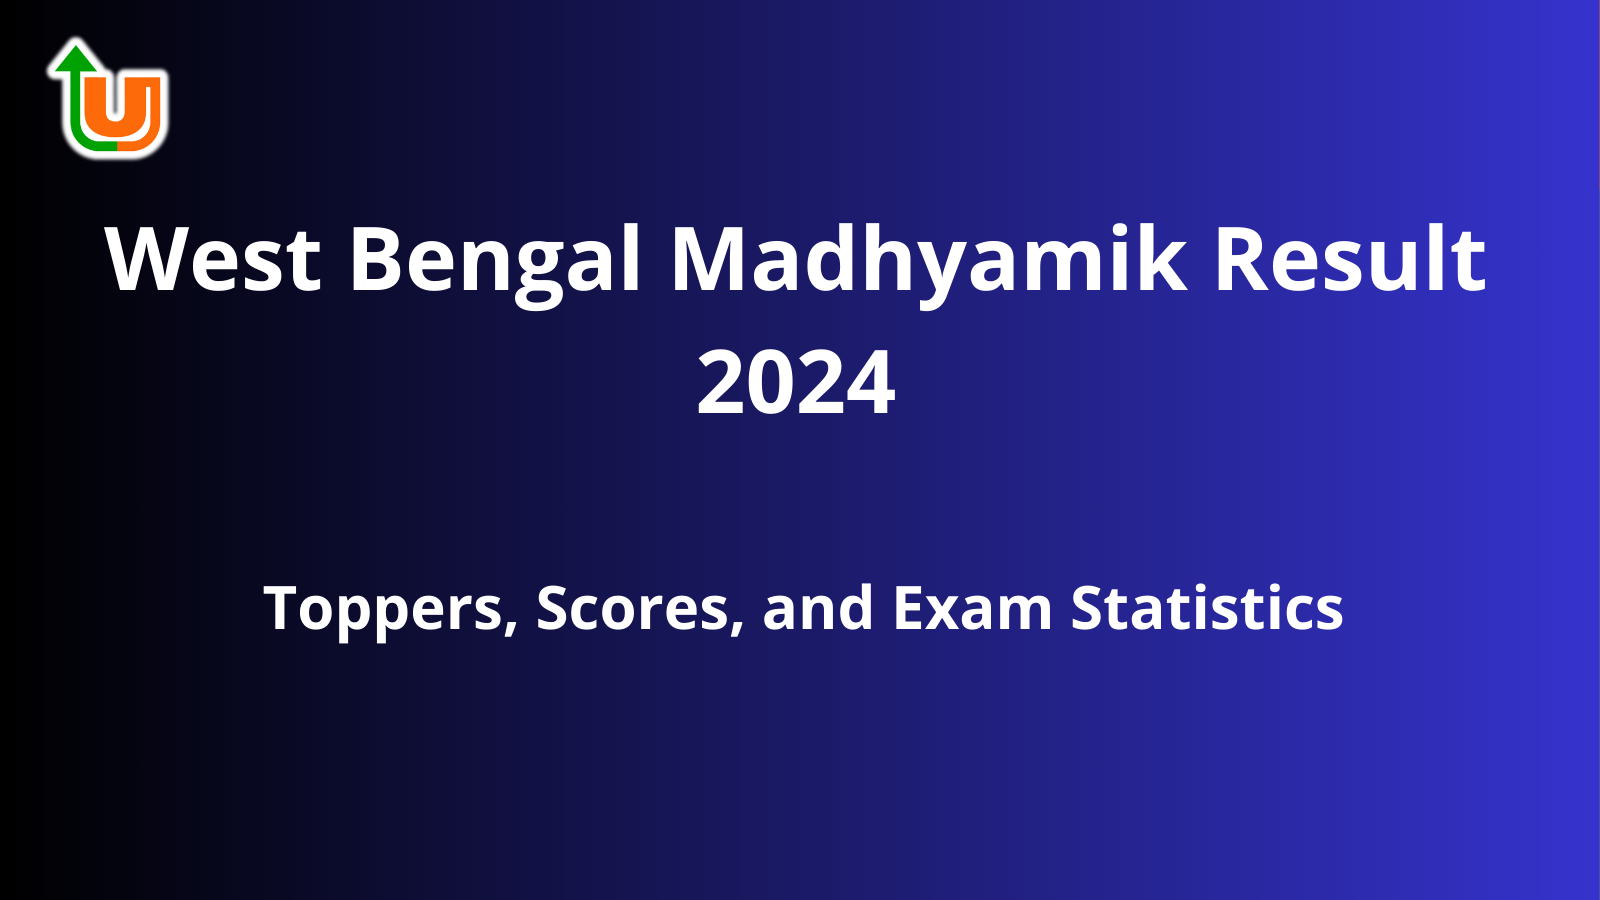 West Bengal Madhyamik Result 2024: Toppers, Scores, and Exam StatisticsWest Bengal Madhyamik Result 2024: Toppers, Scores, and Exam Statistics